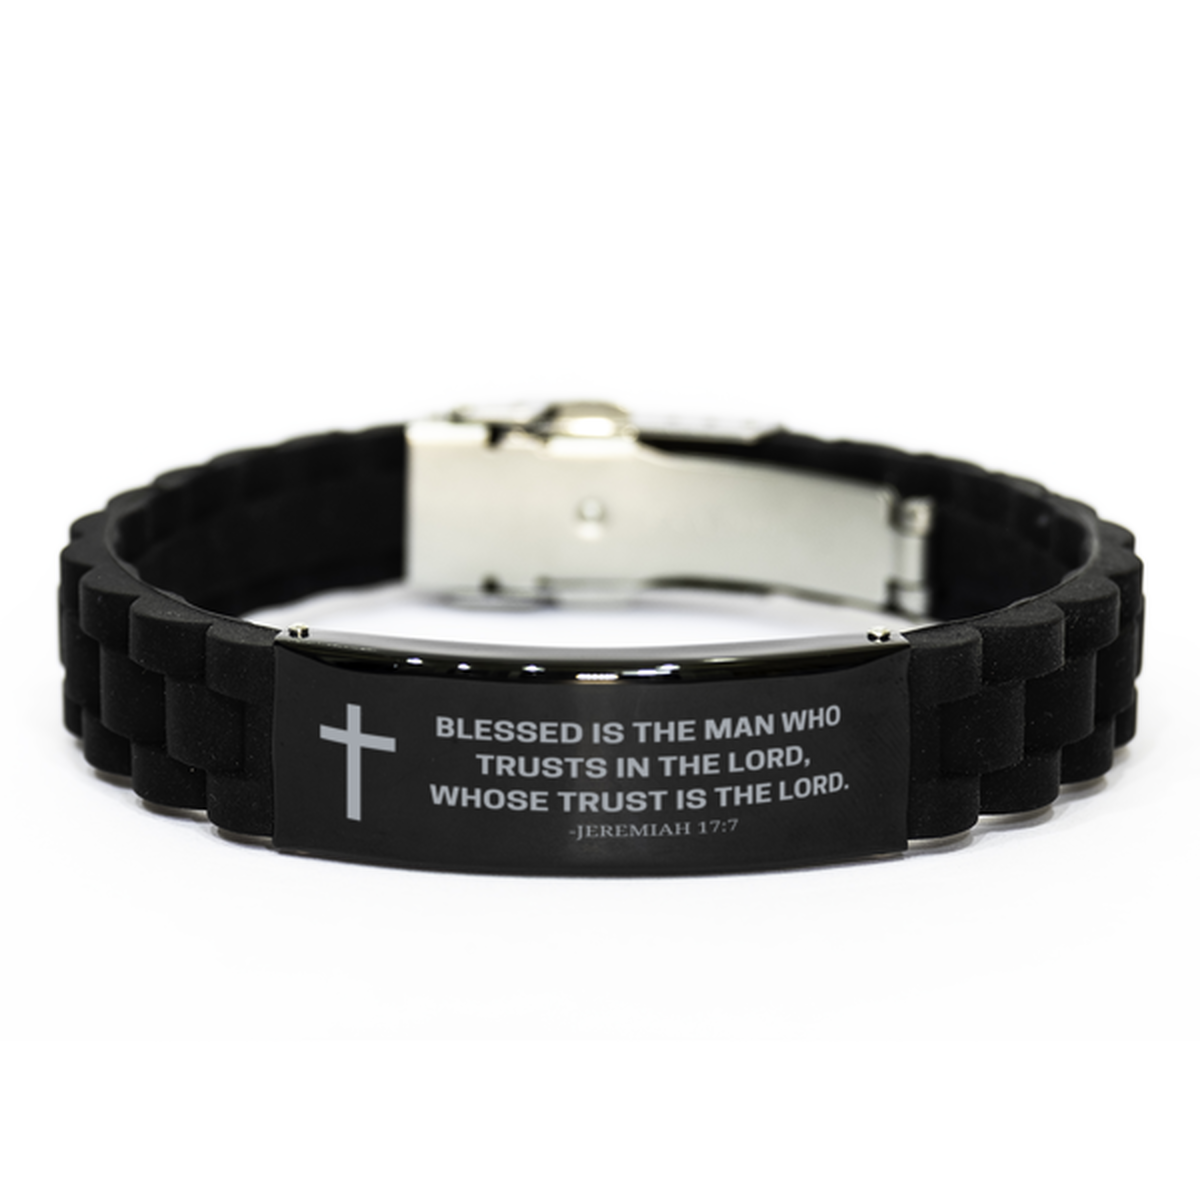 Baptism Gifts For Teenage Boys Girls, Christian Bible Verse Black Glidelock Clasp Bracelet, Blessed is the man who trusts, Catholic Confirmation Gifts for Son, Godson, Grandson, Nephew